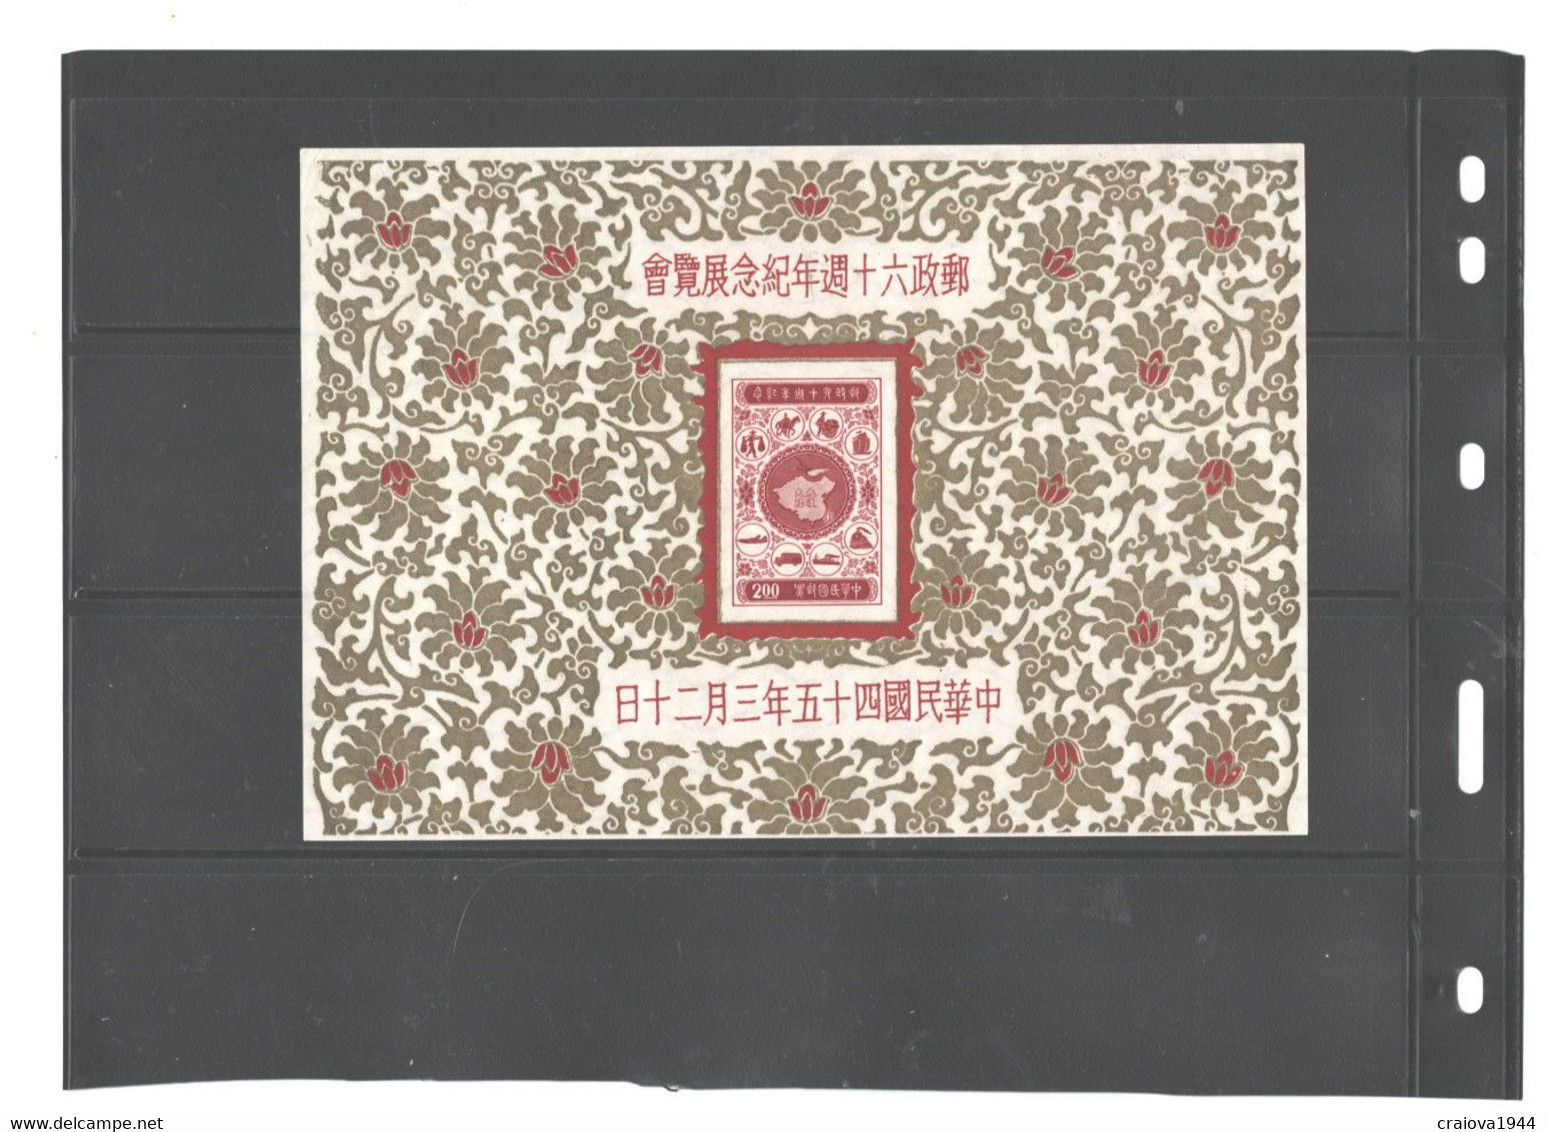 REPUBLIC OF CHINA 1956 MS#1136 MNH NO GUM AS ISSUED - Ungebraucht